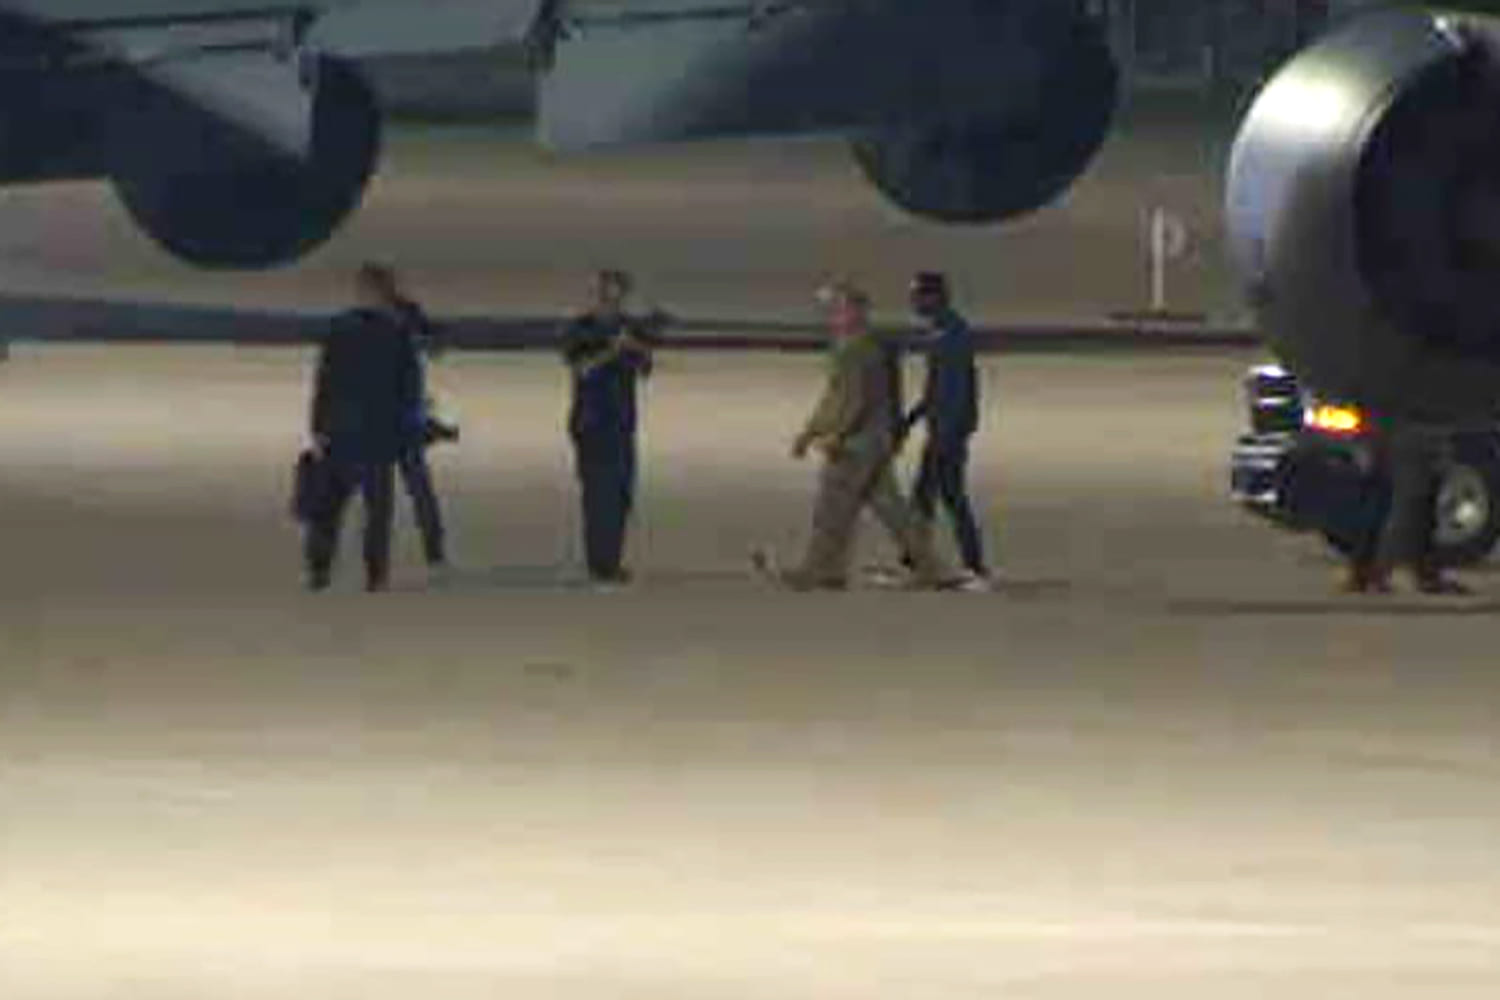 American soldier Travis King arrives back in the U.S. after being expelled from North Korea